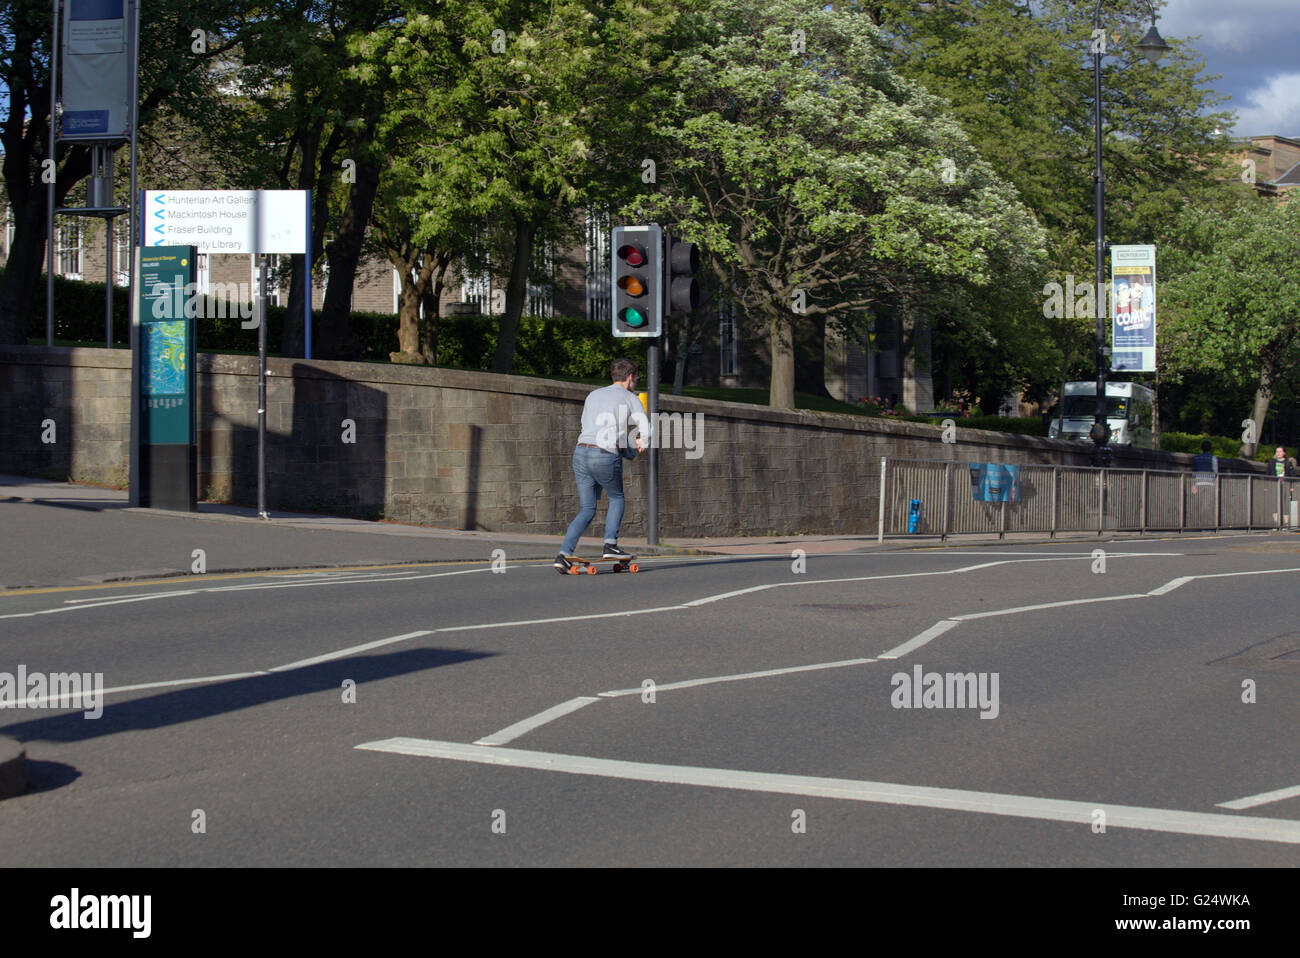 Young man skateboarding down a street past traffic lights on green for go Glasgow, Scotland, UK. Stock Photo